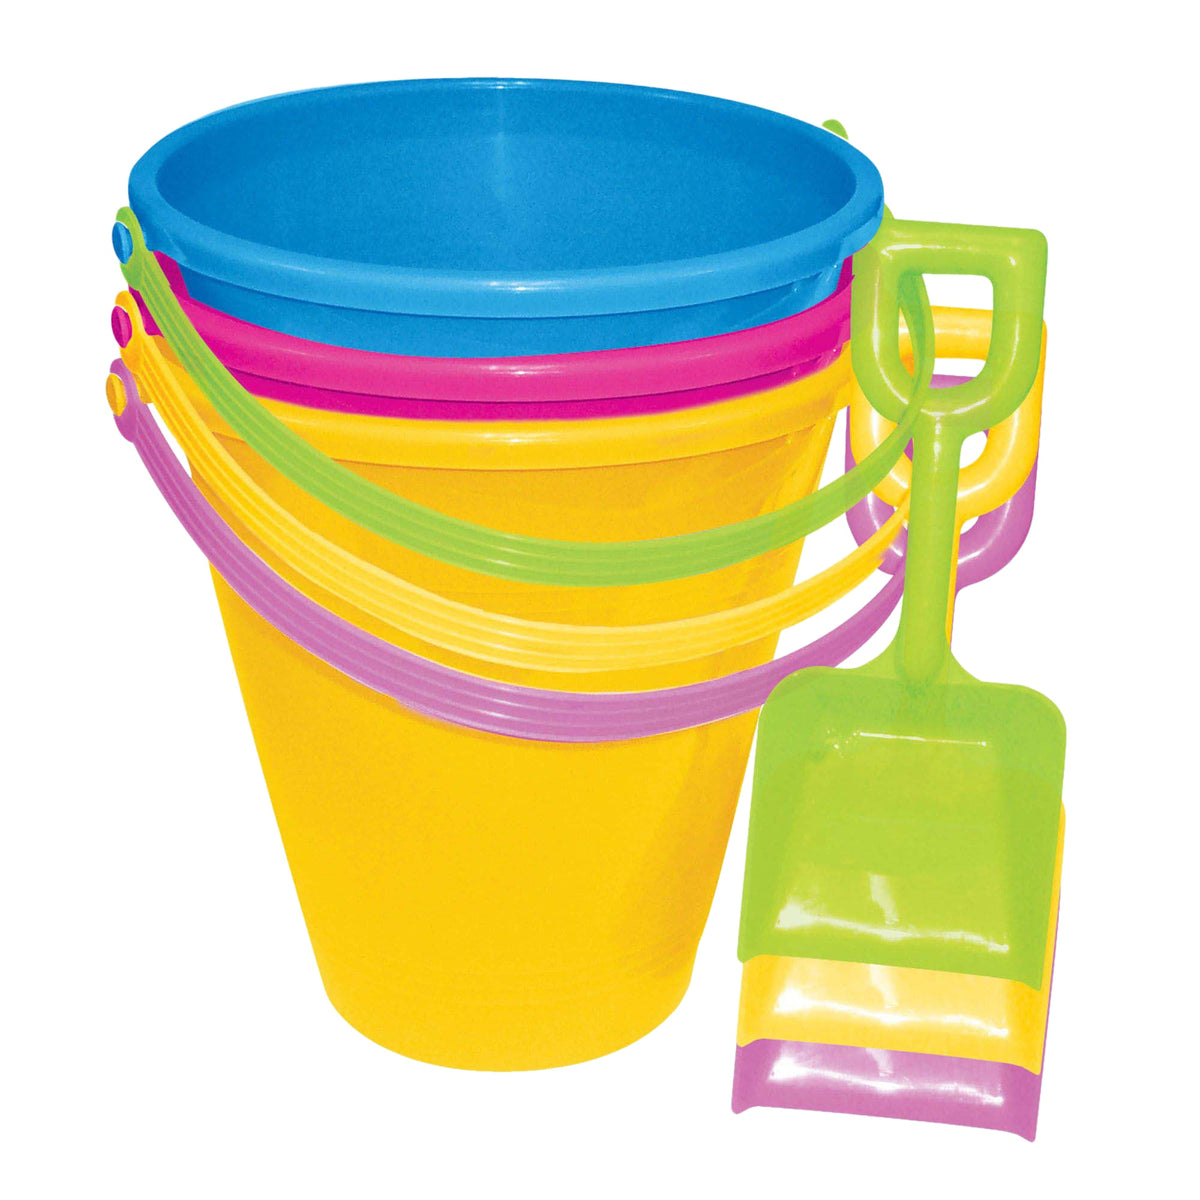 AMSCAN CA Summer Small Pail With Shovel, Assortment, 1 Count